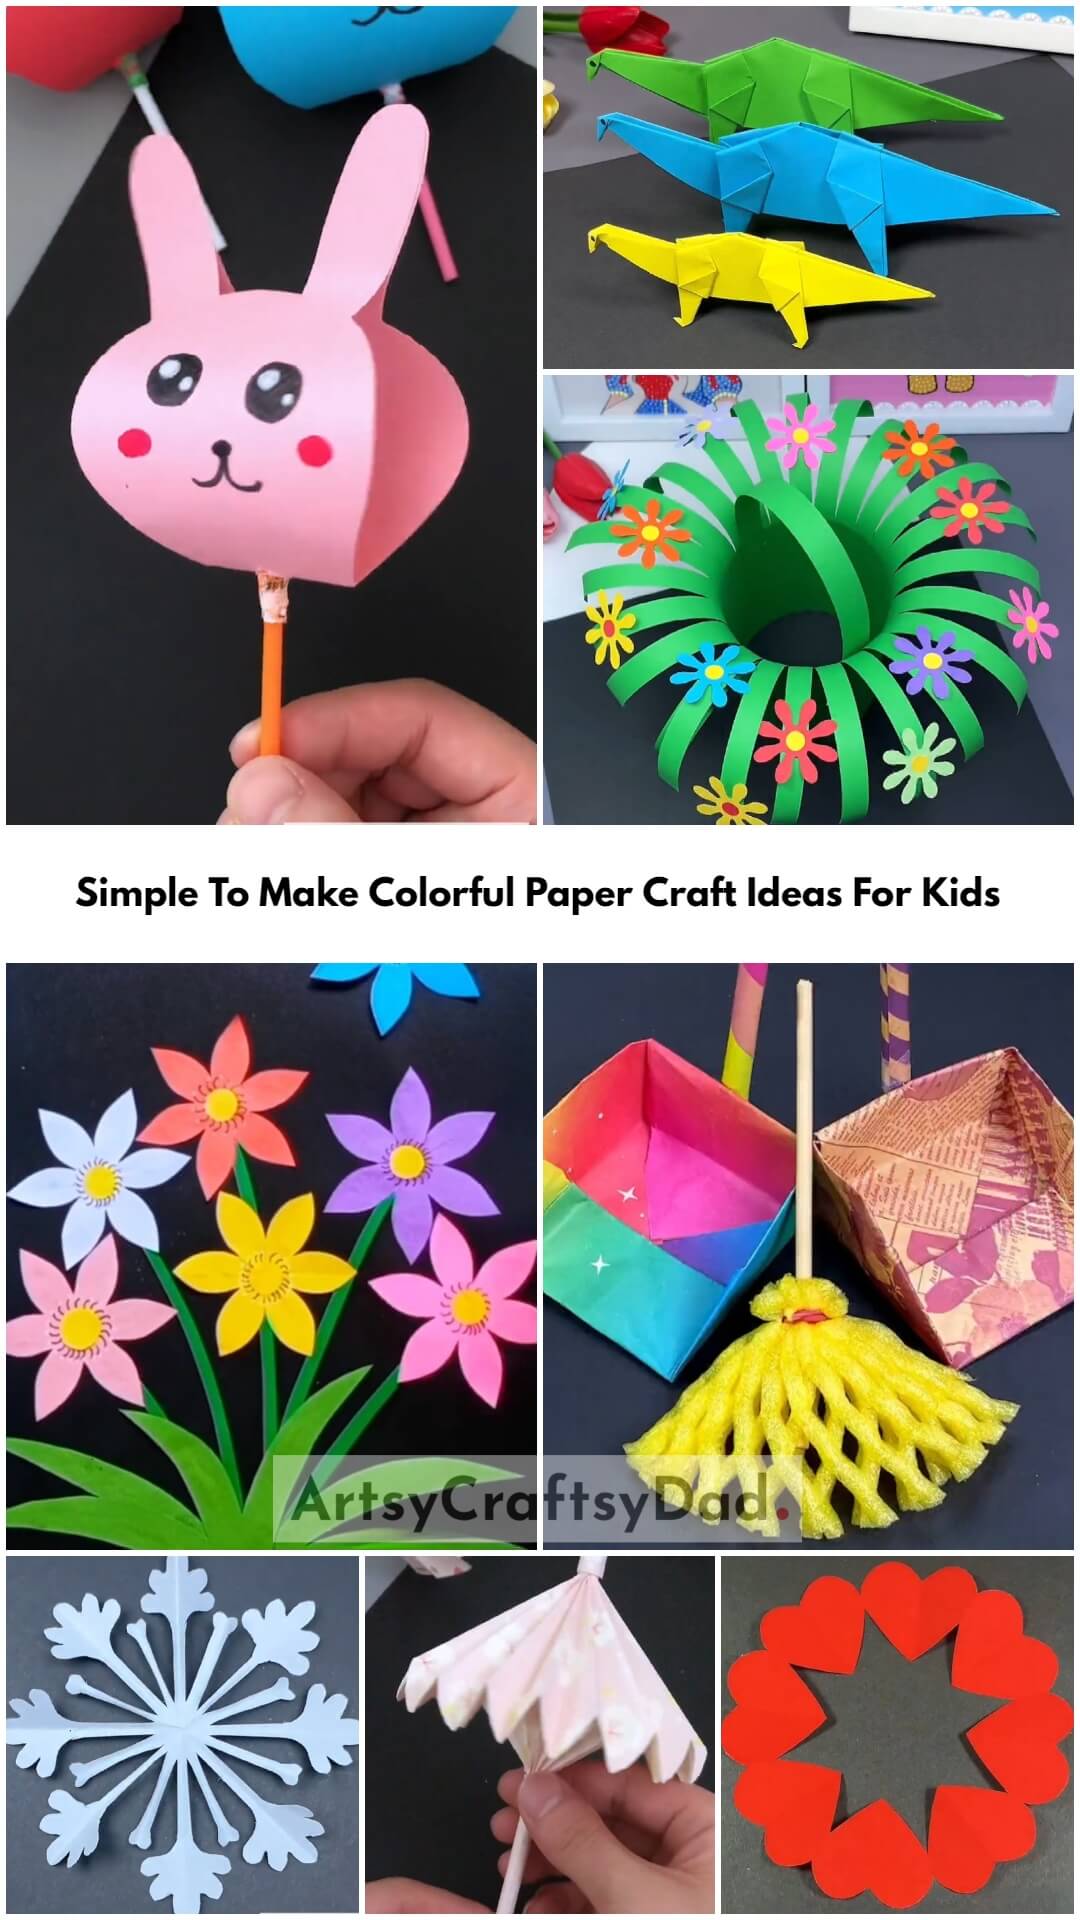 Simple To Make Colorful Paper Craft Ideas For Kids